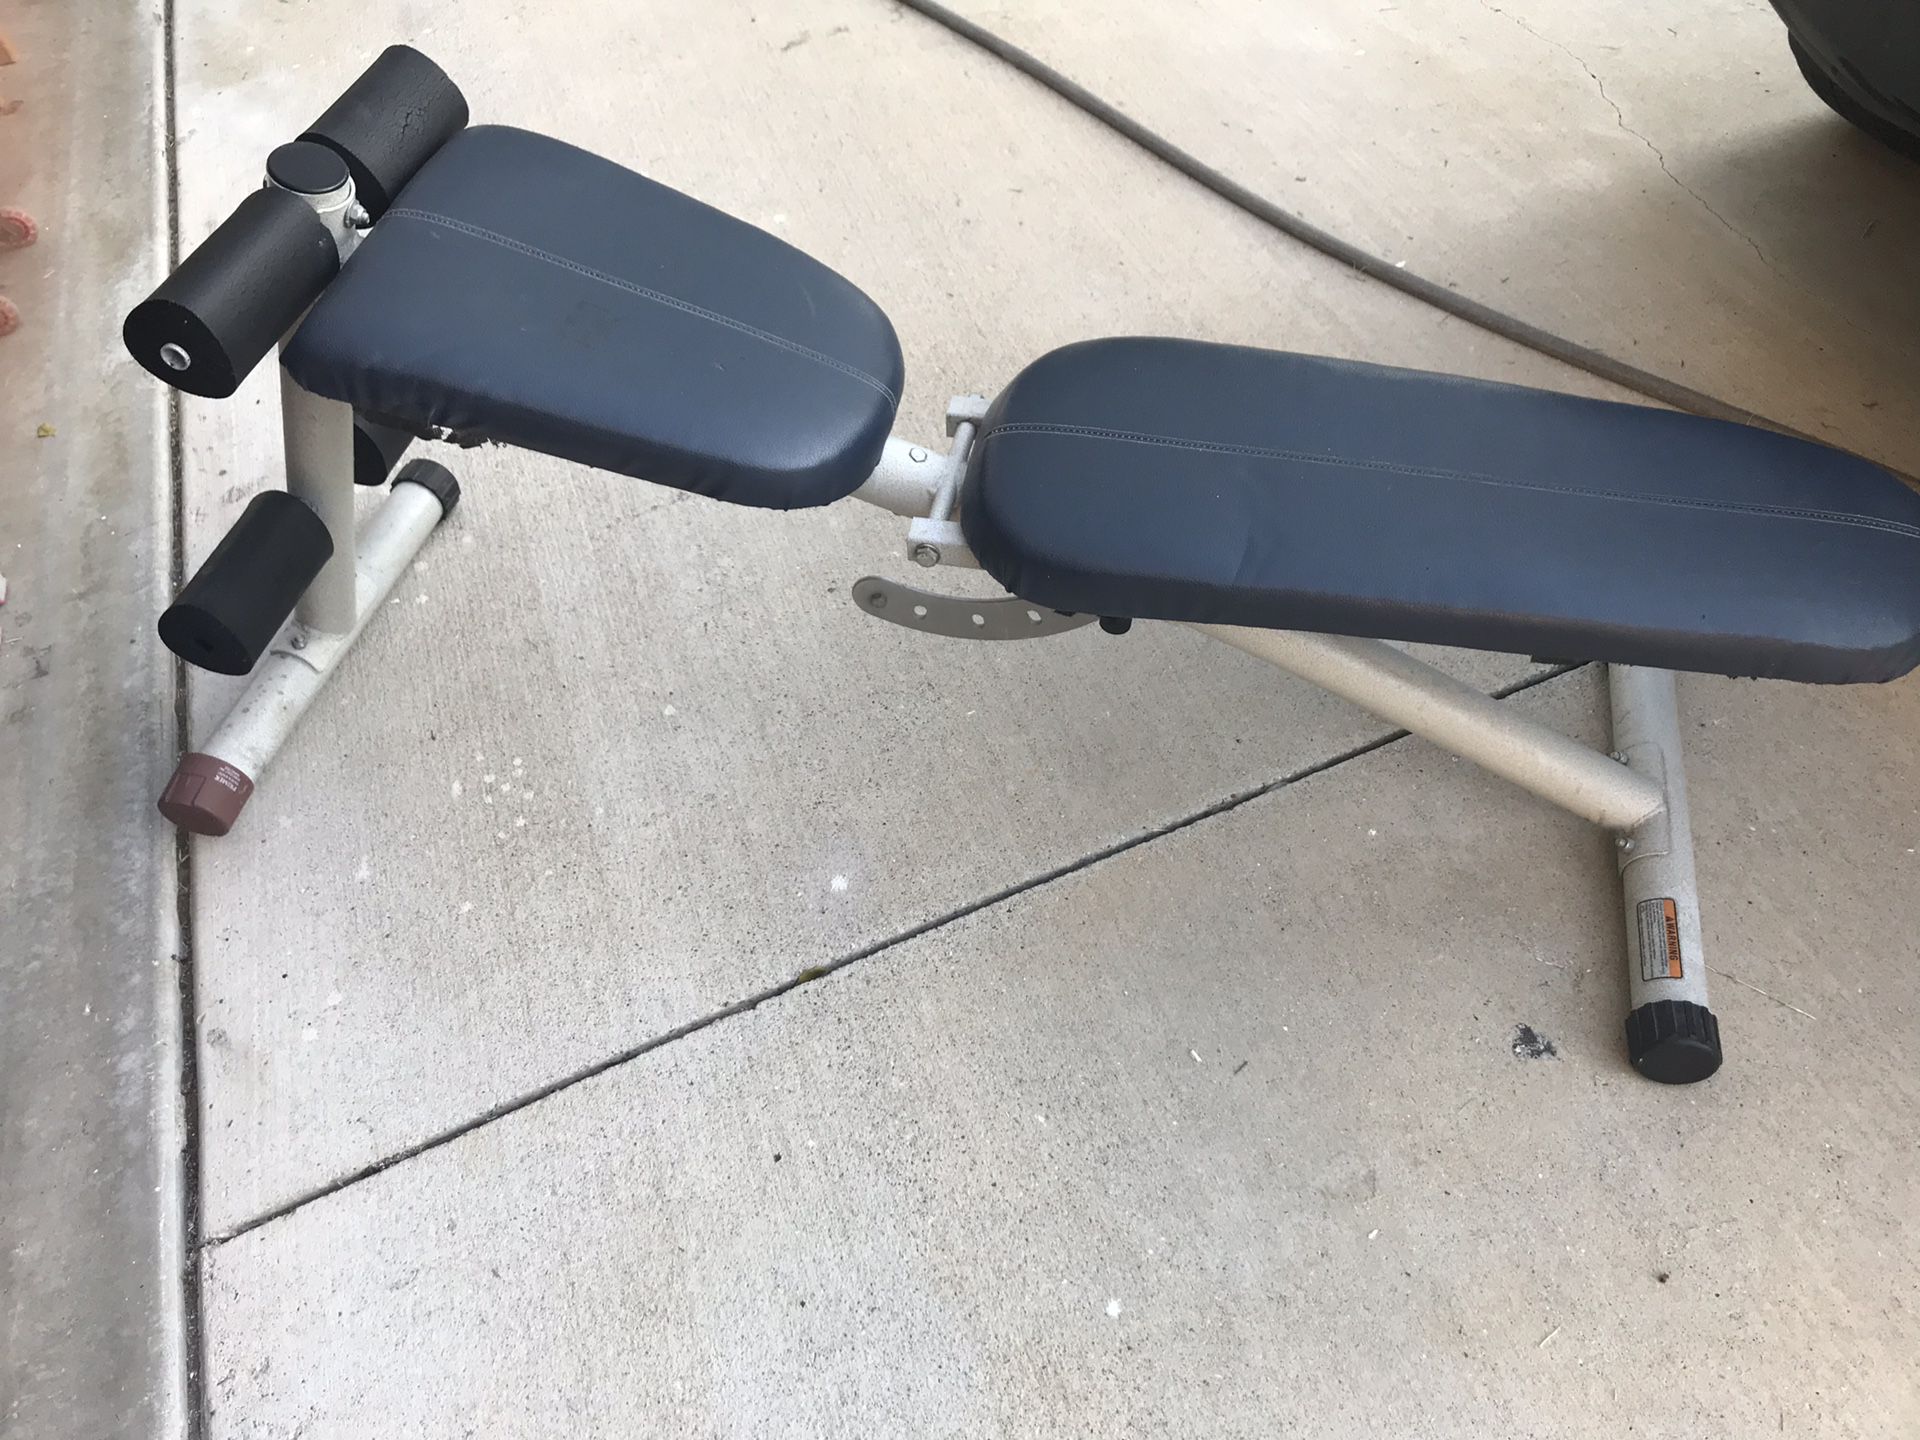 Workout Bench $20